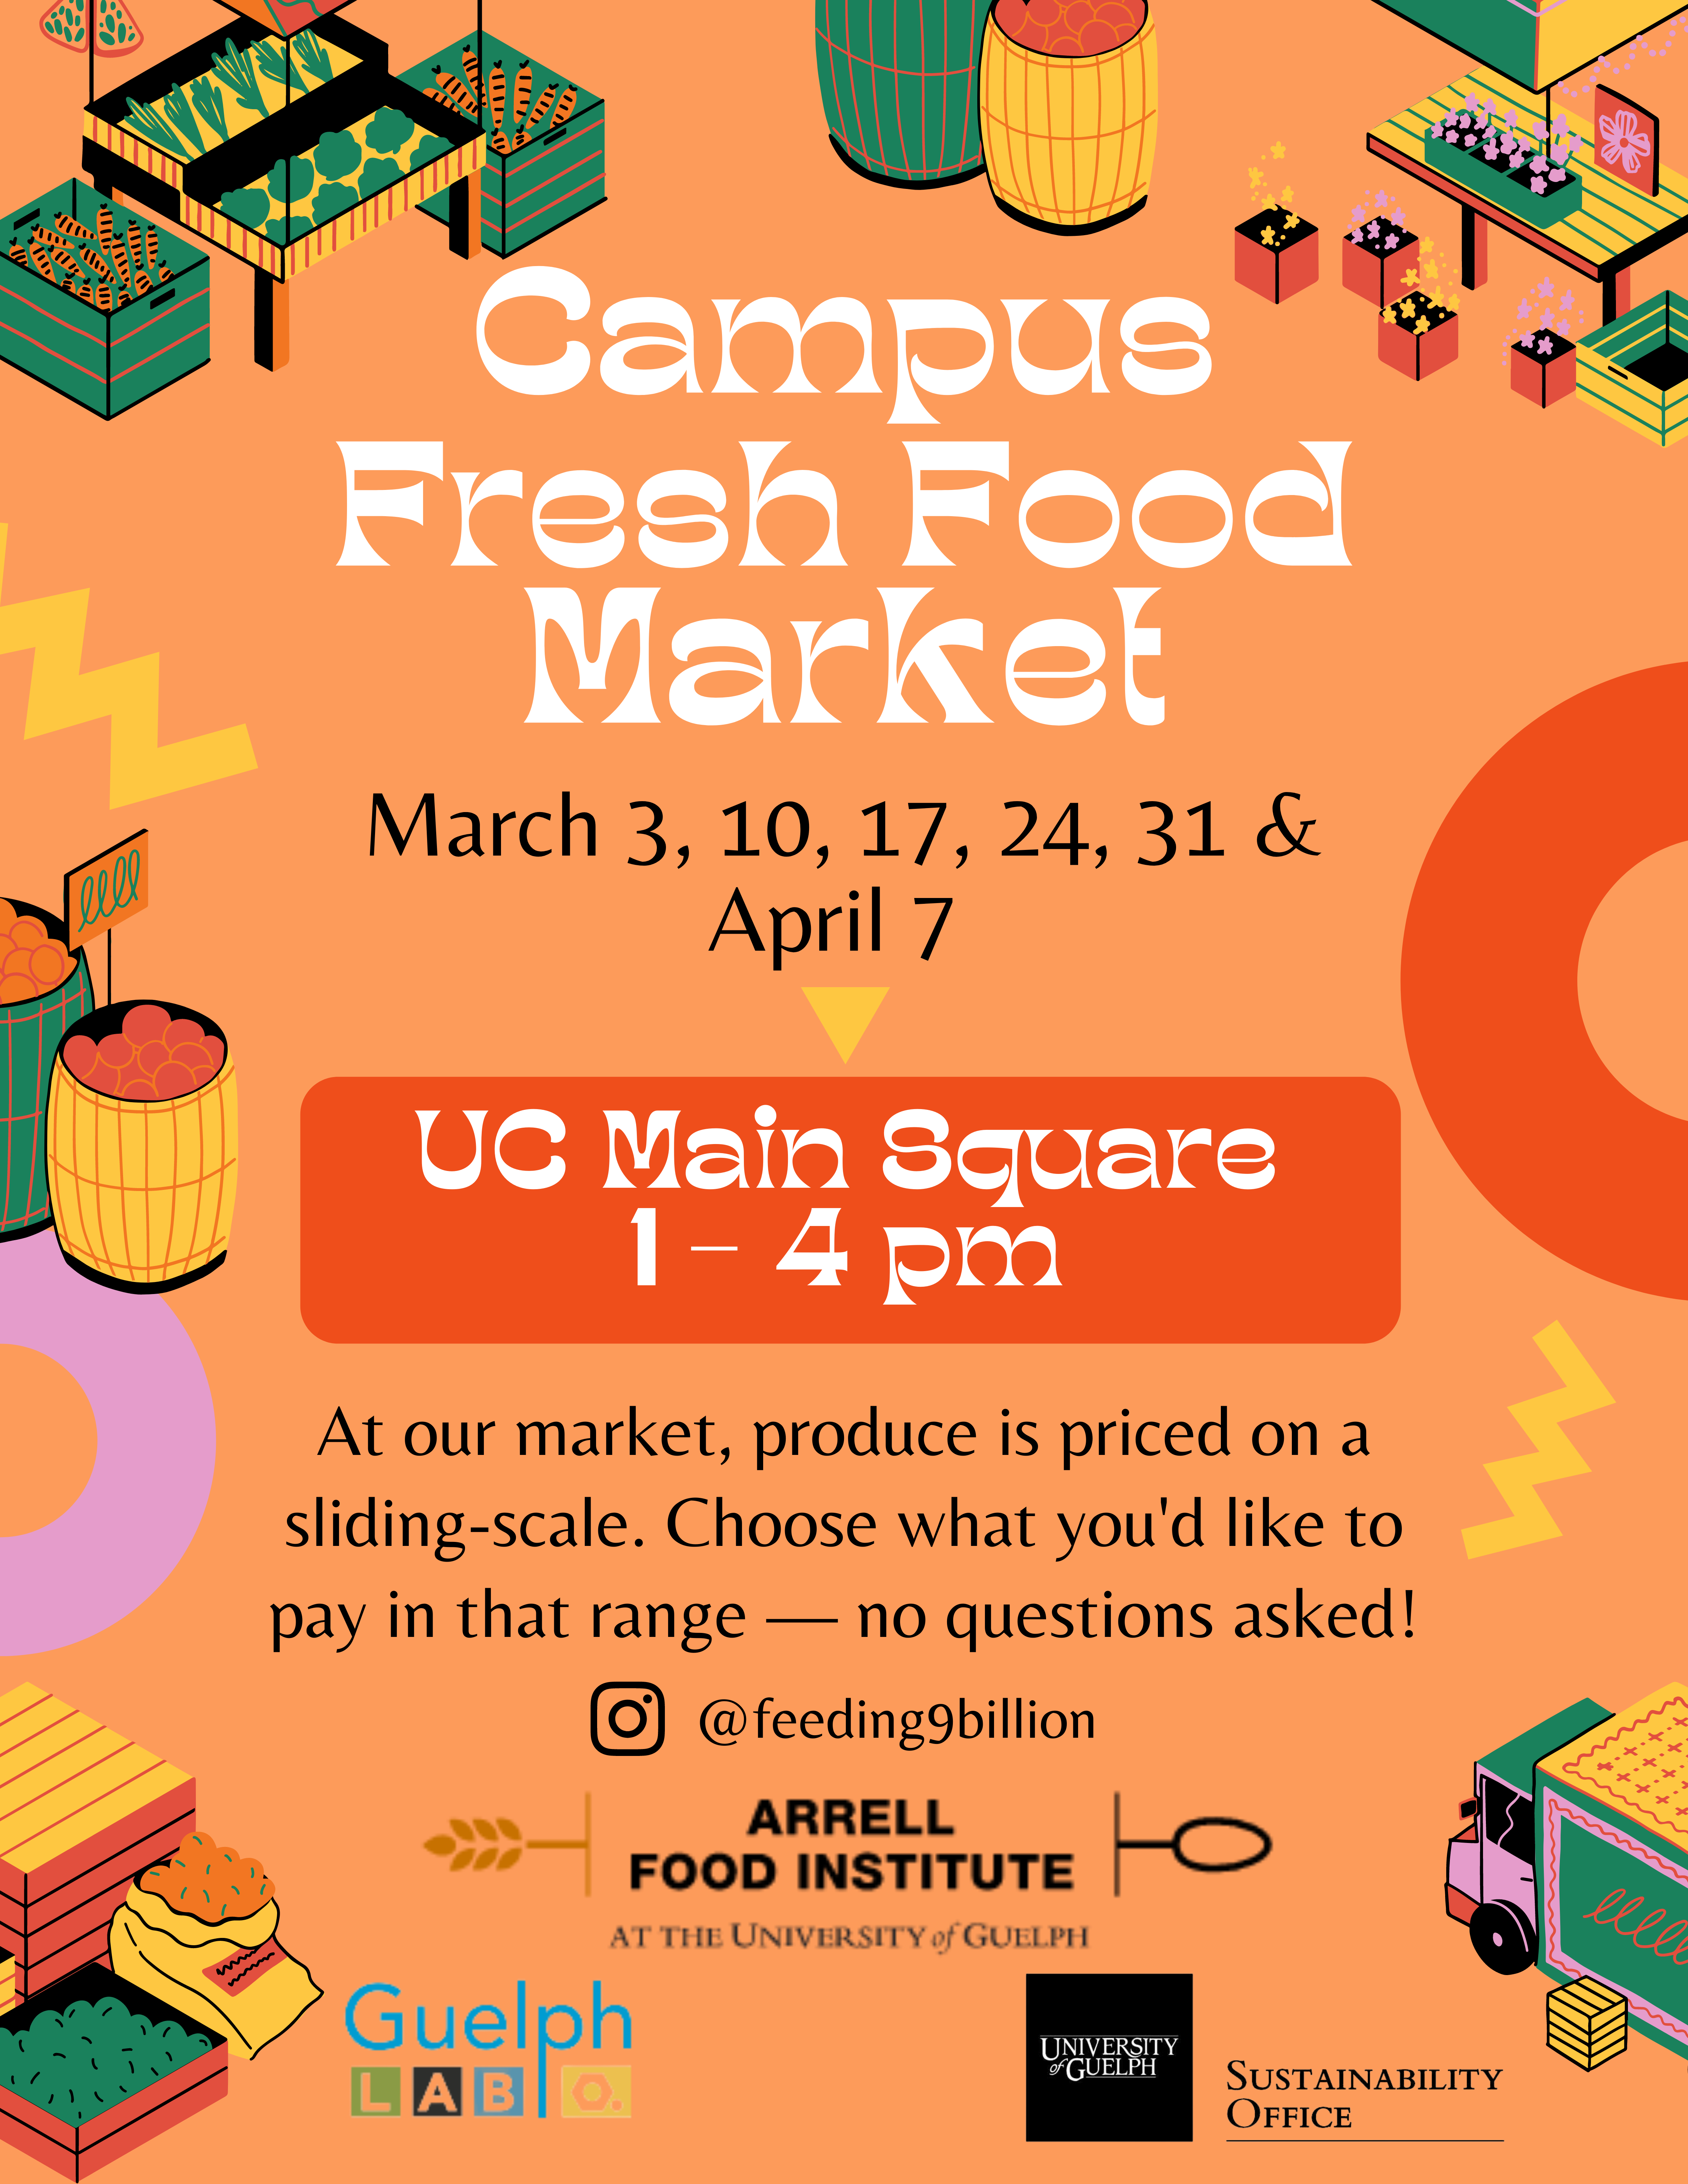 Orange poster with the text "Campus Fresh Food Market March 3, 10, 17, 24, 31 & April 7 UC Main Square 1-4pm At our market, produce is priced on a sliding-scale. Choose what you'd like to pay in that range - no questions asked!" Logos for Feeding 9 Billion, Arrell Food Institute, Guelph Food Lab, and the Sustainability Office are at the bottom.